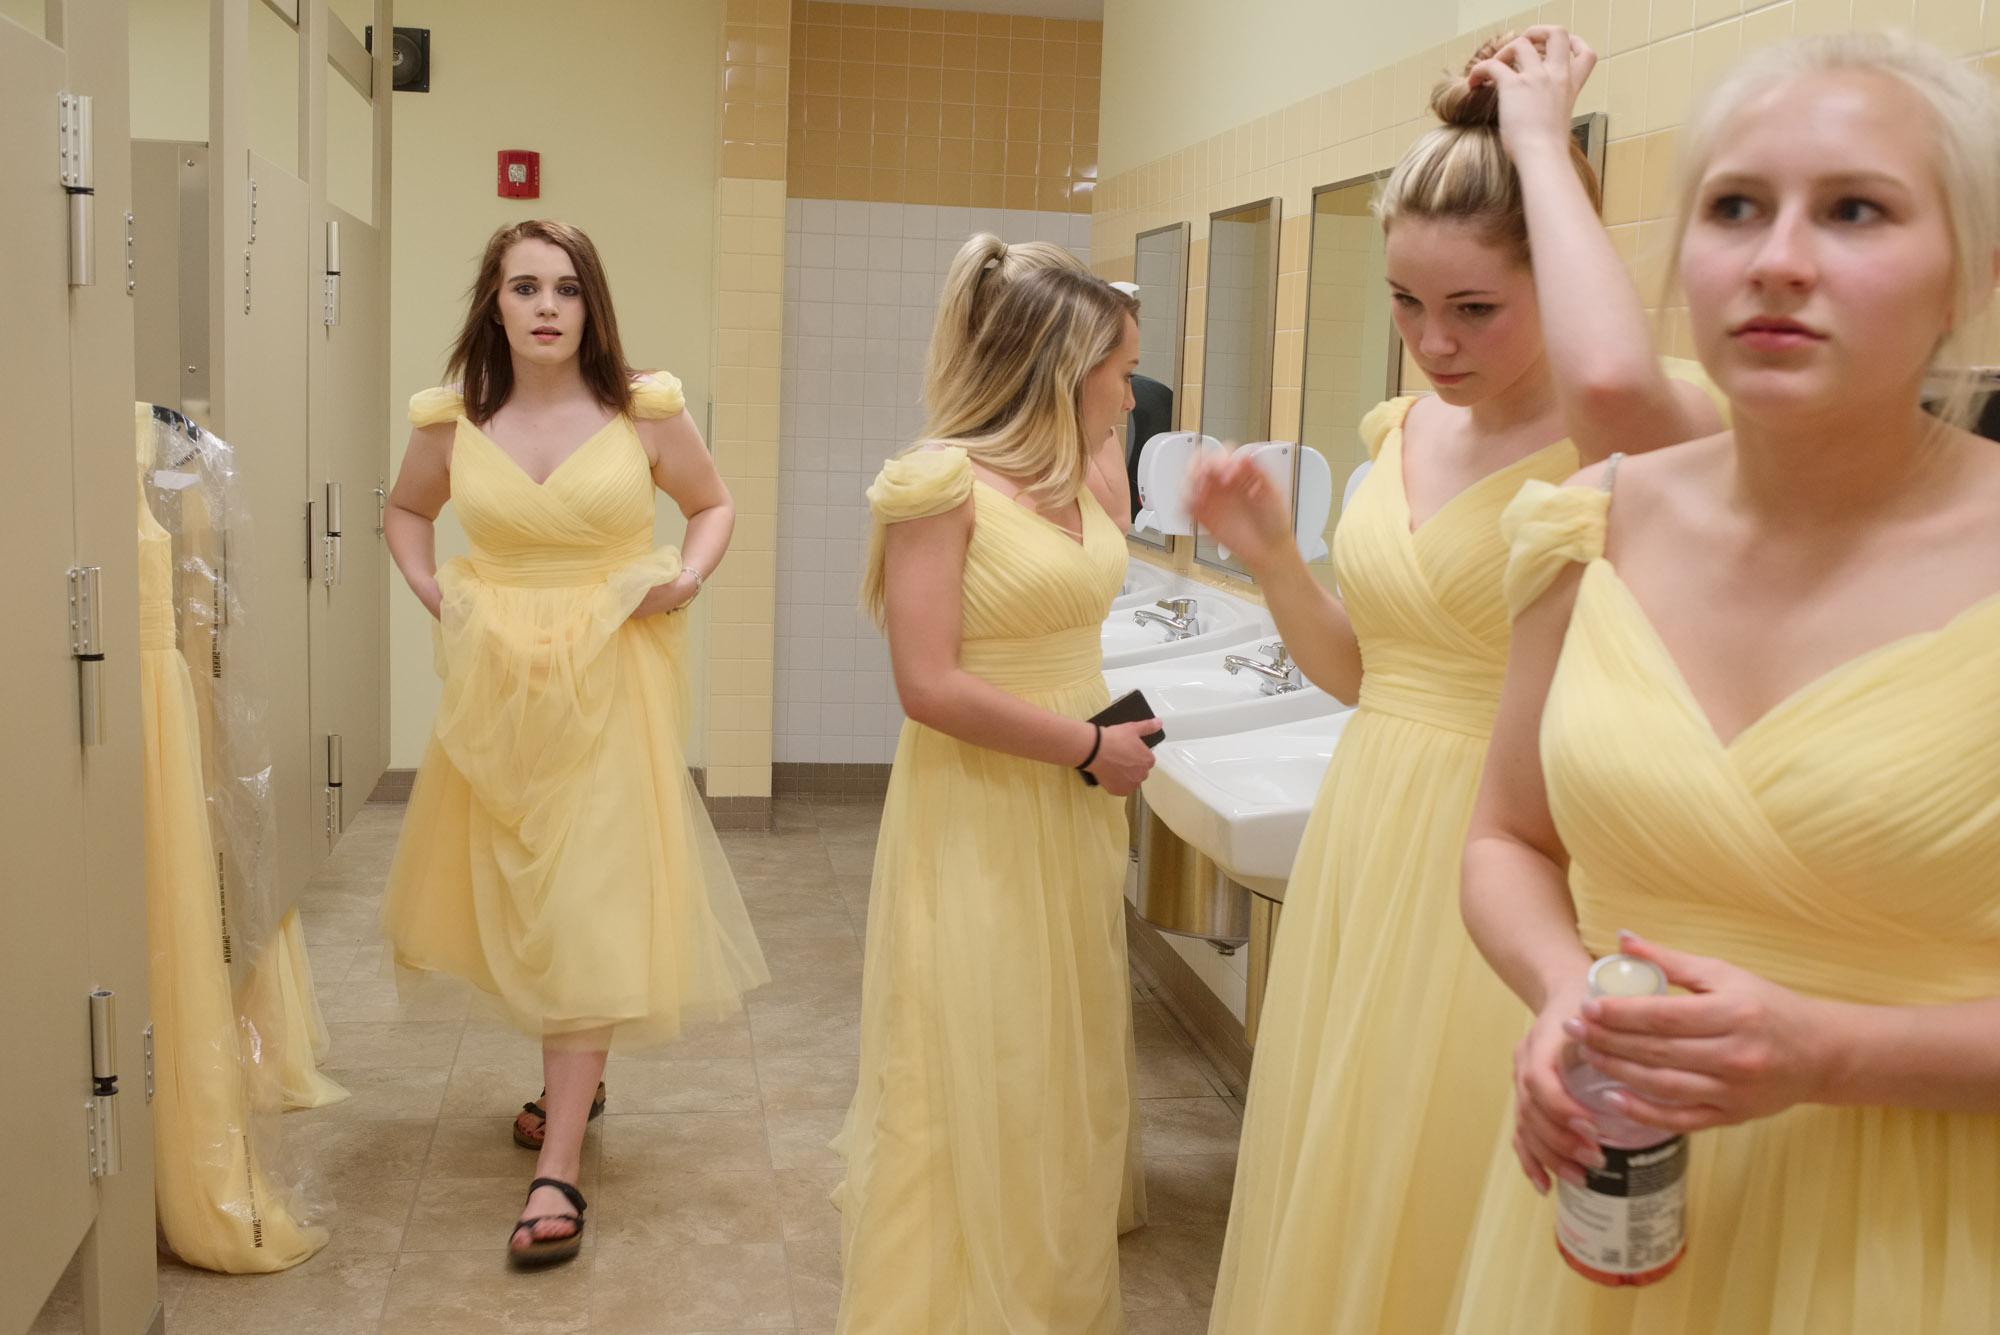 Contestants of the 62nd Apple Blossom Cotillion in the dressing-room of the gymnasium of the Riverside Middle School, getting ready for their first...